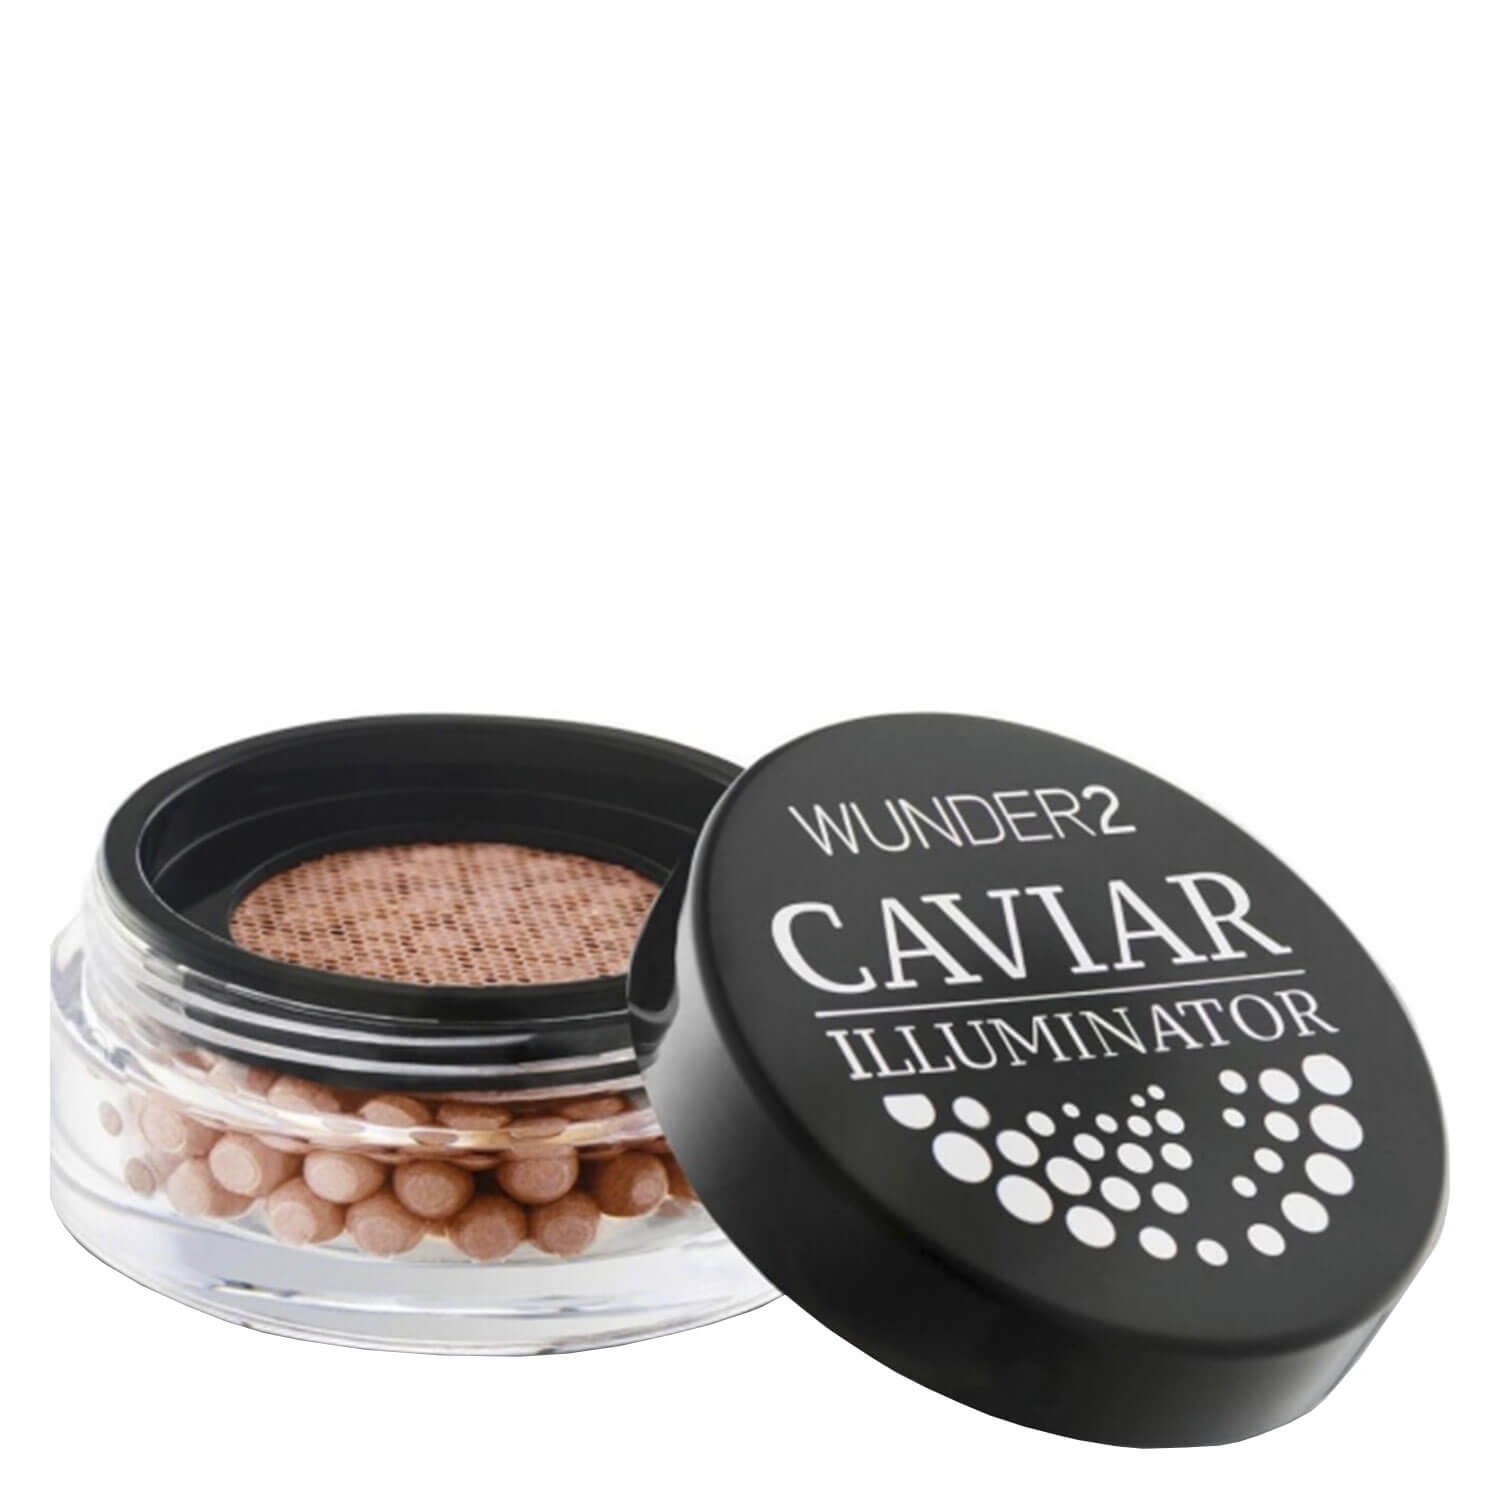 Product image from WUNDER2 - Caviar Illuminator Coral Shimmer